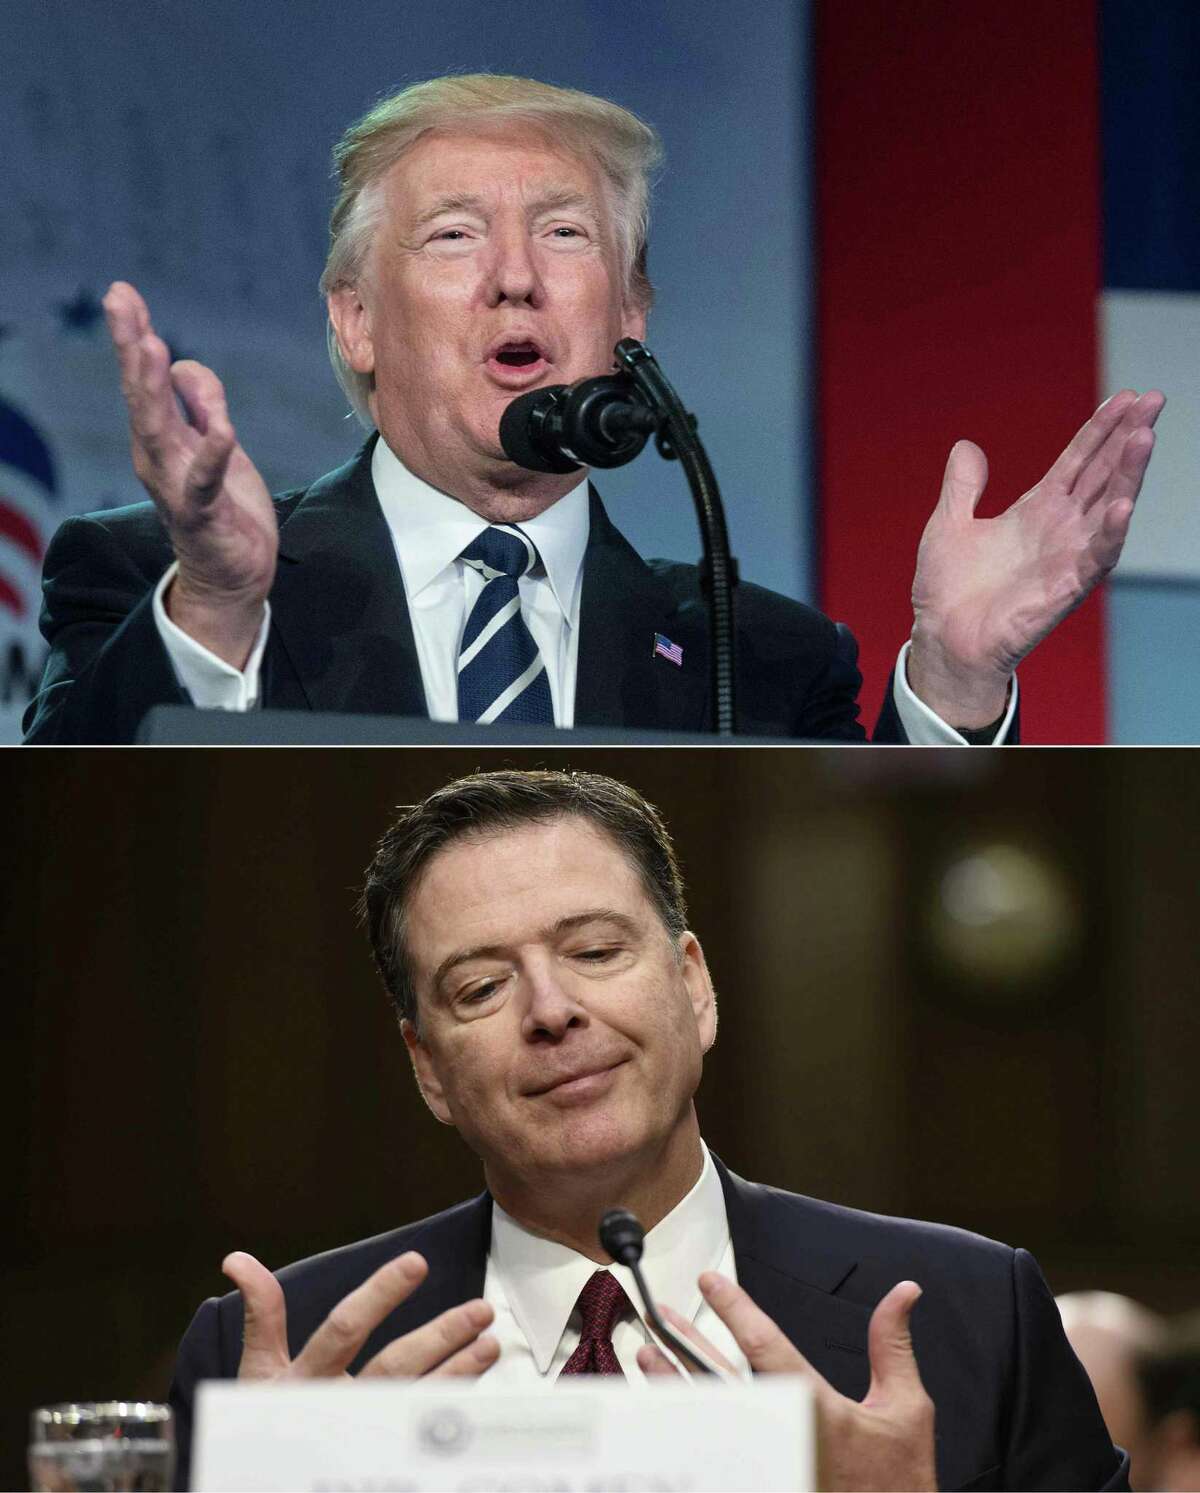 This combination of pictures shows President Donald Trump and former FBI Director James Comey. (AFP/Getty Images)